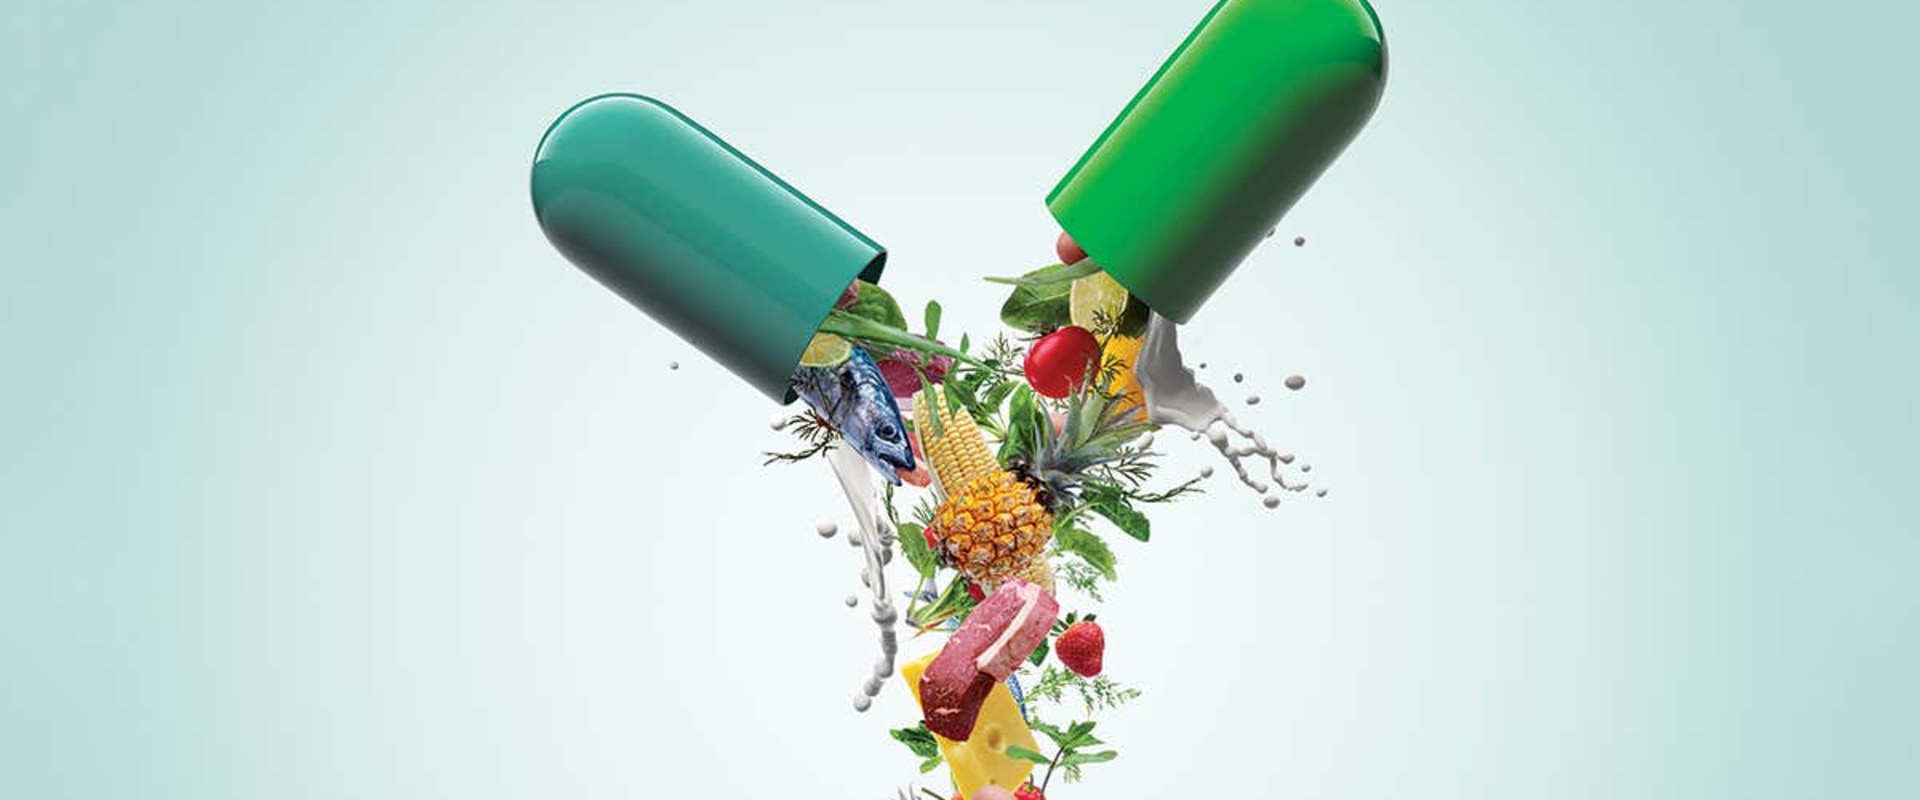 Are Vitamins and Supplements Safe to Take? An Expert's Guide